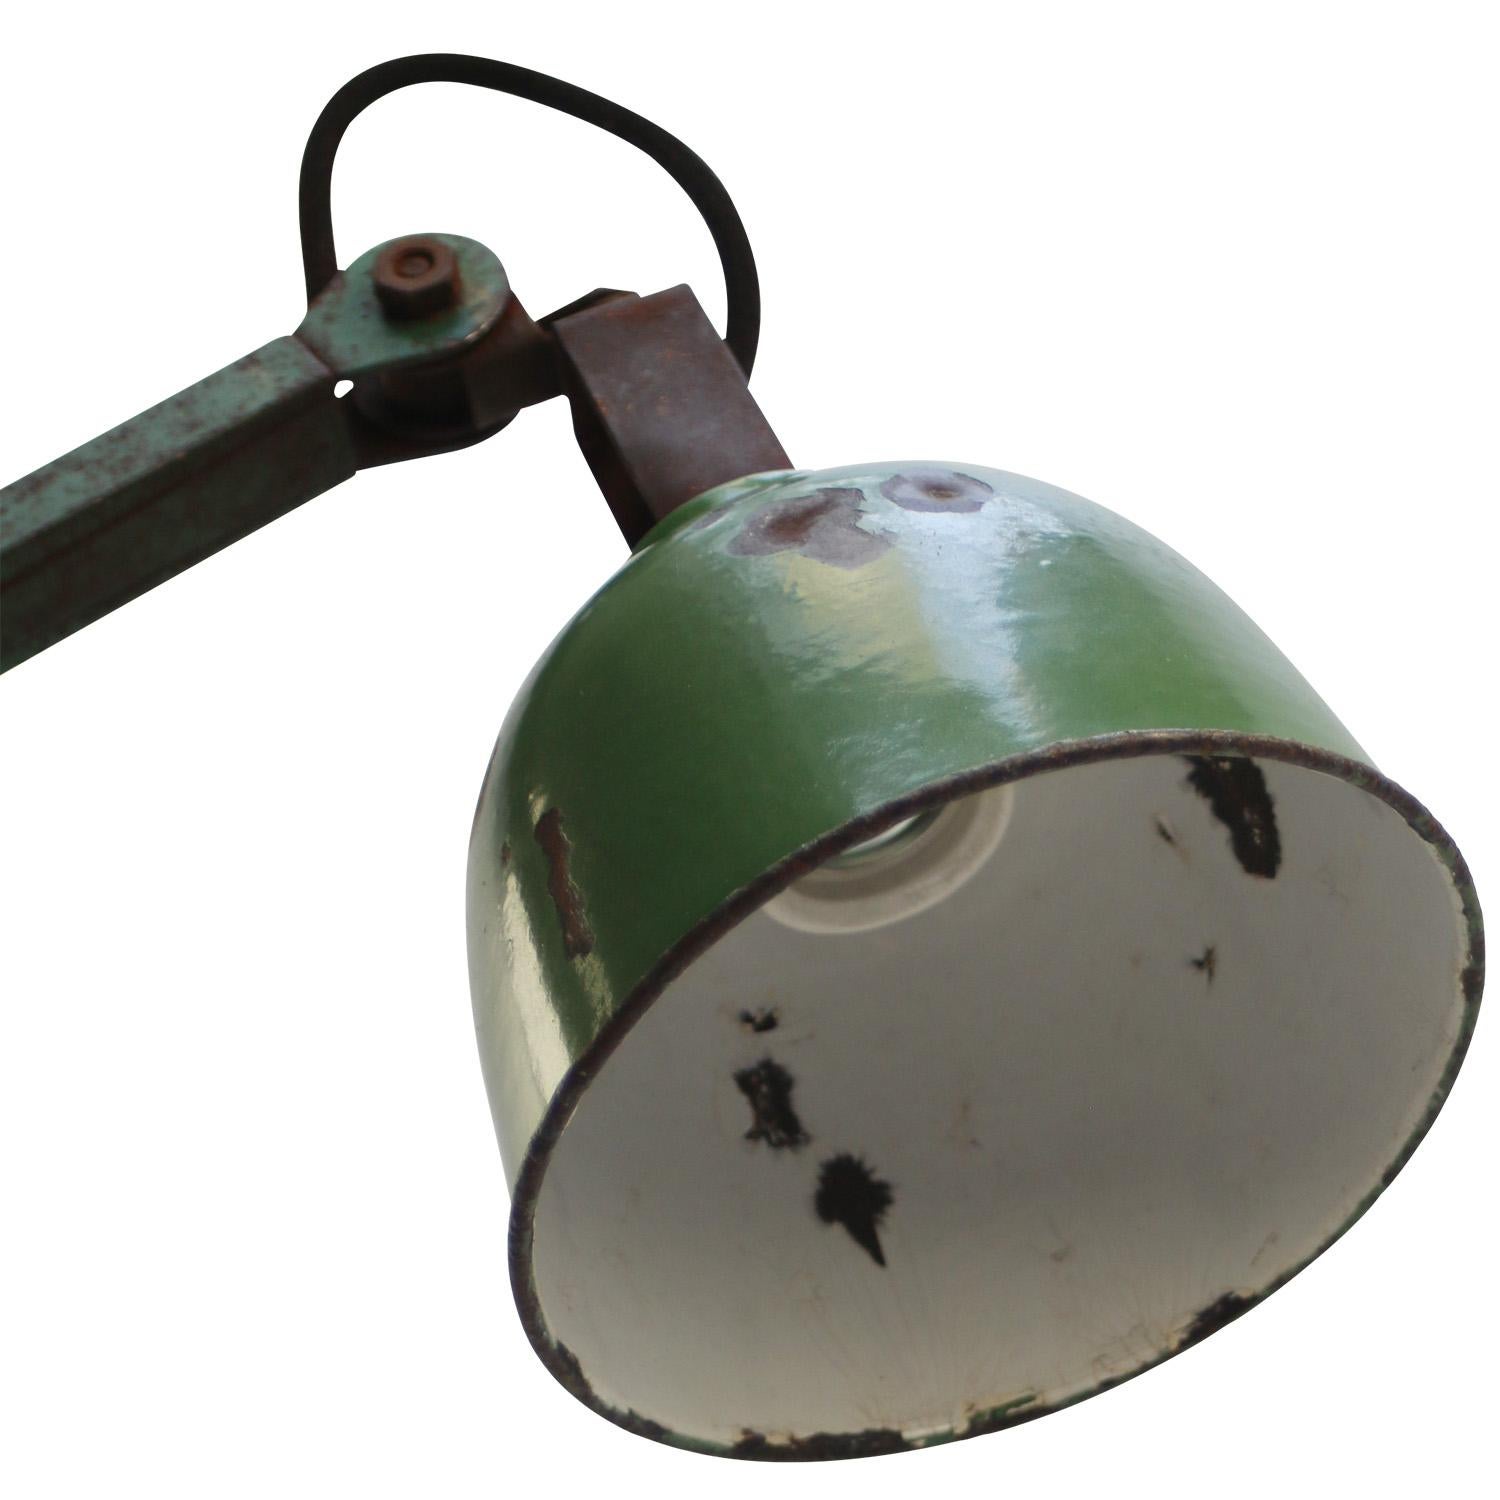 1950s Green enamel, cast iron industrial 4 arm machinist work light by DUGDILLS, UK
adjustable in height and angle
including plug and switch
width as pictures: 90 cm

Minimum length 35 cm / Maximum length 95 cm

Wall base size 19 × 6.5 cm

Priced